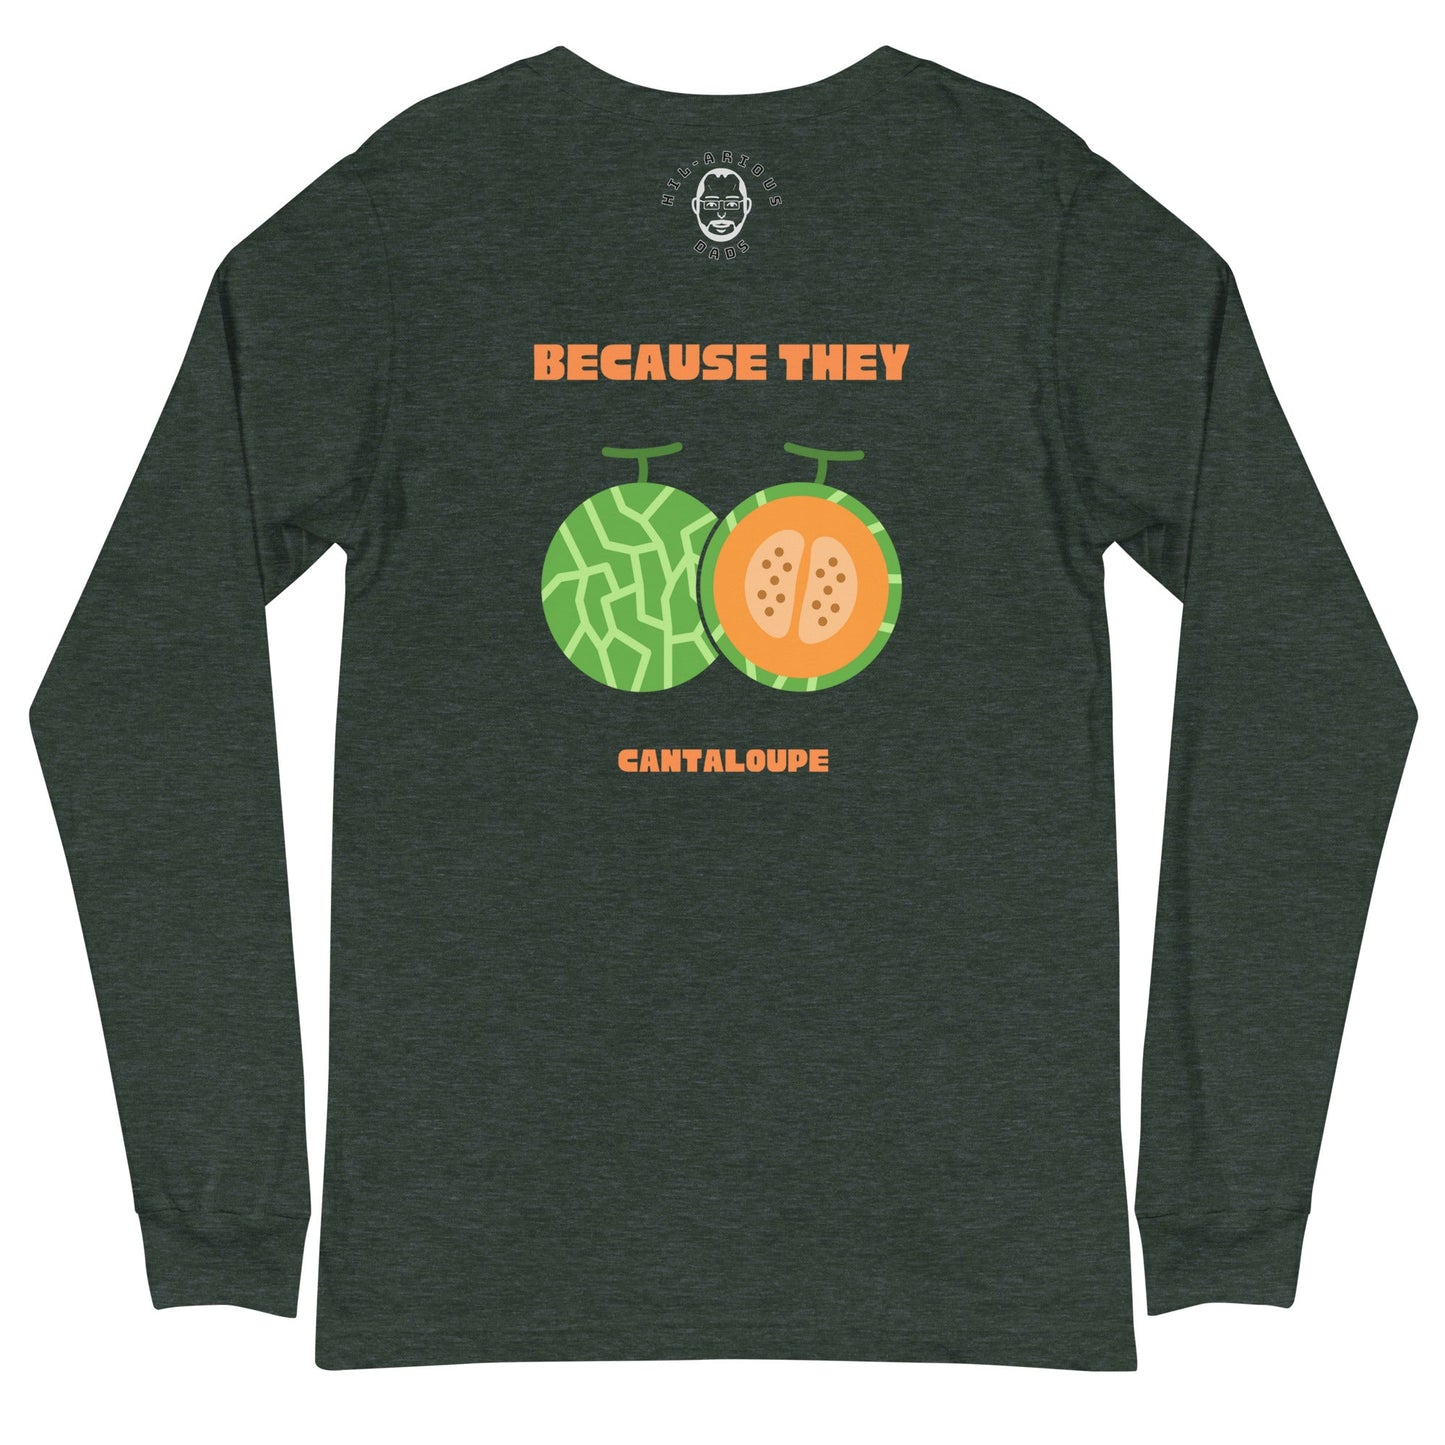 Why didn’t the melons get married?-Long Sleeve Tee - Hil-arious Dads